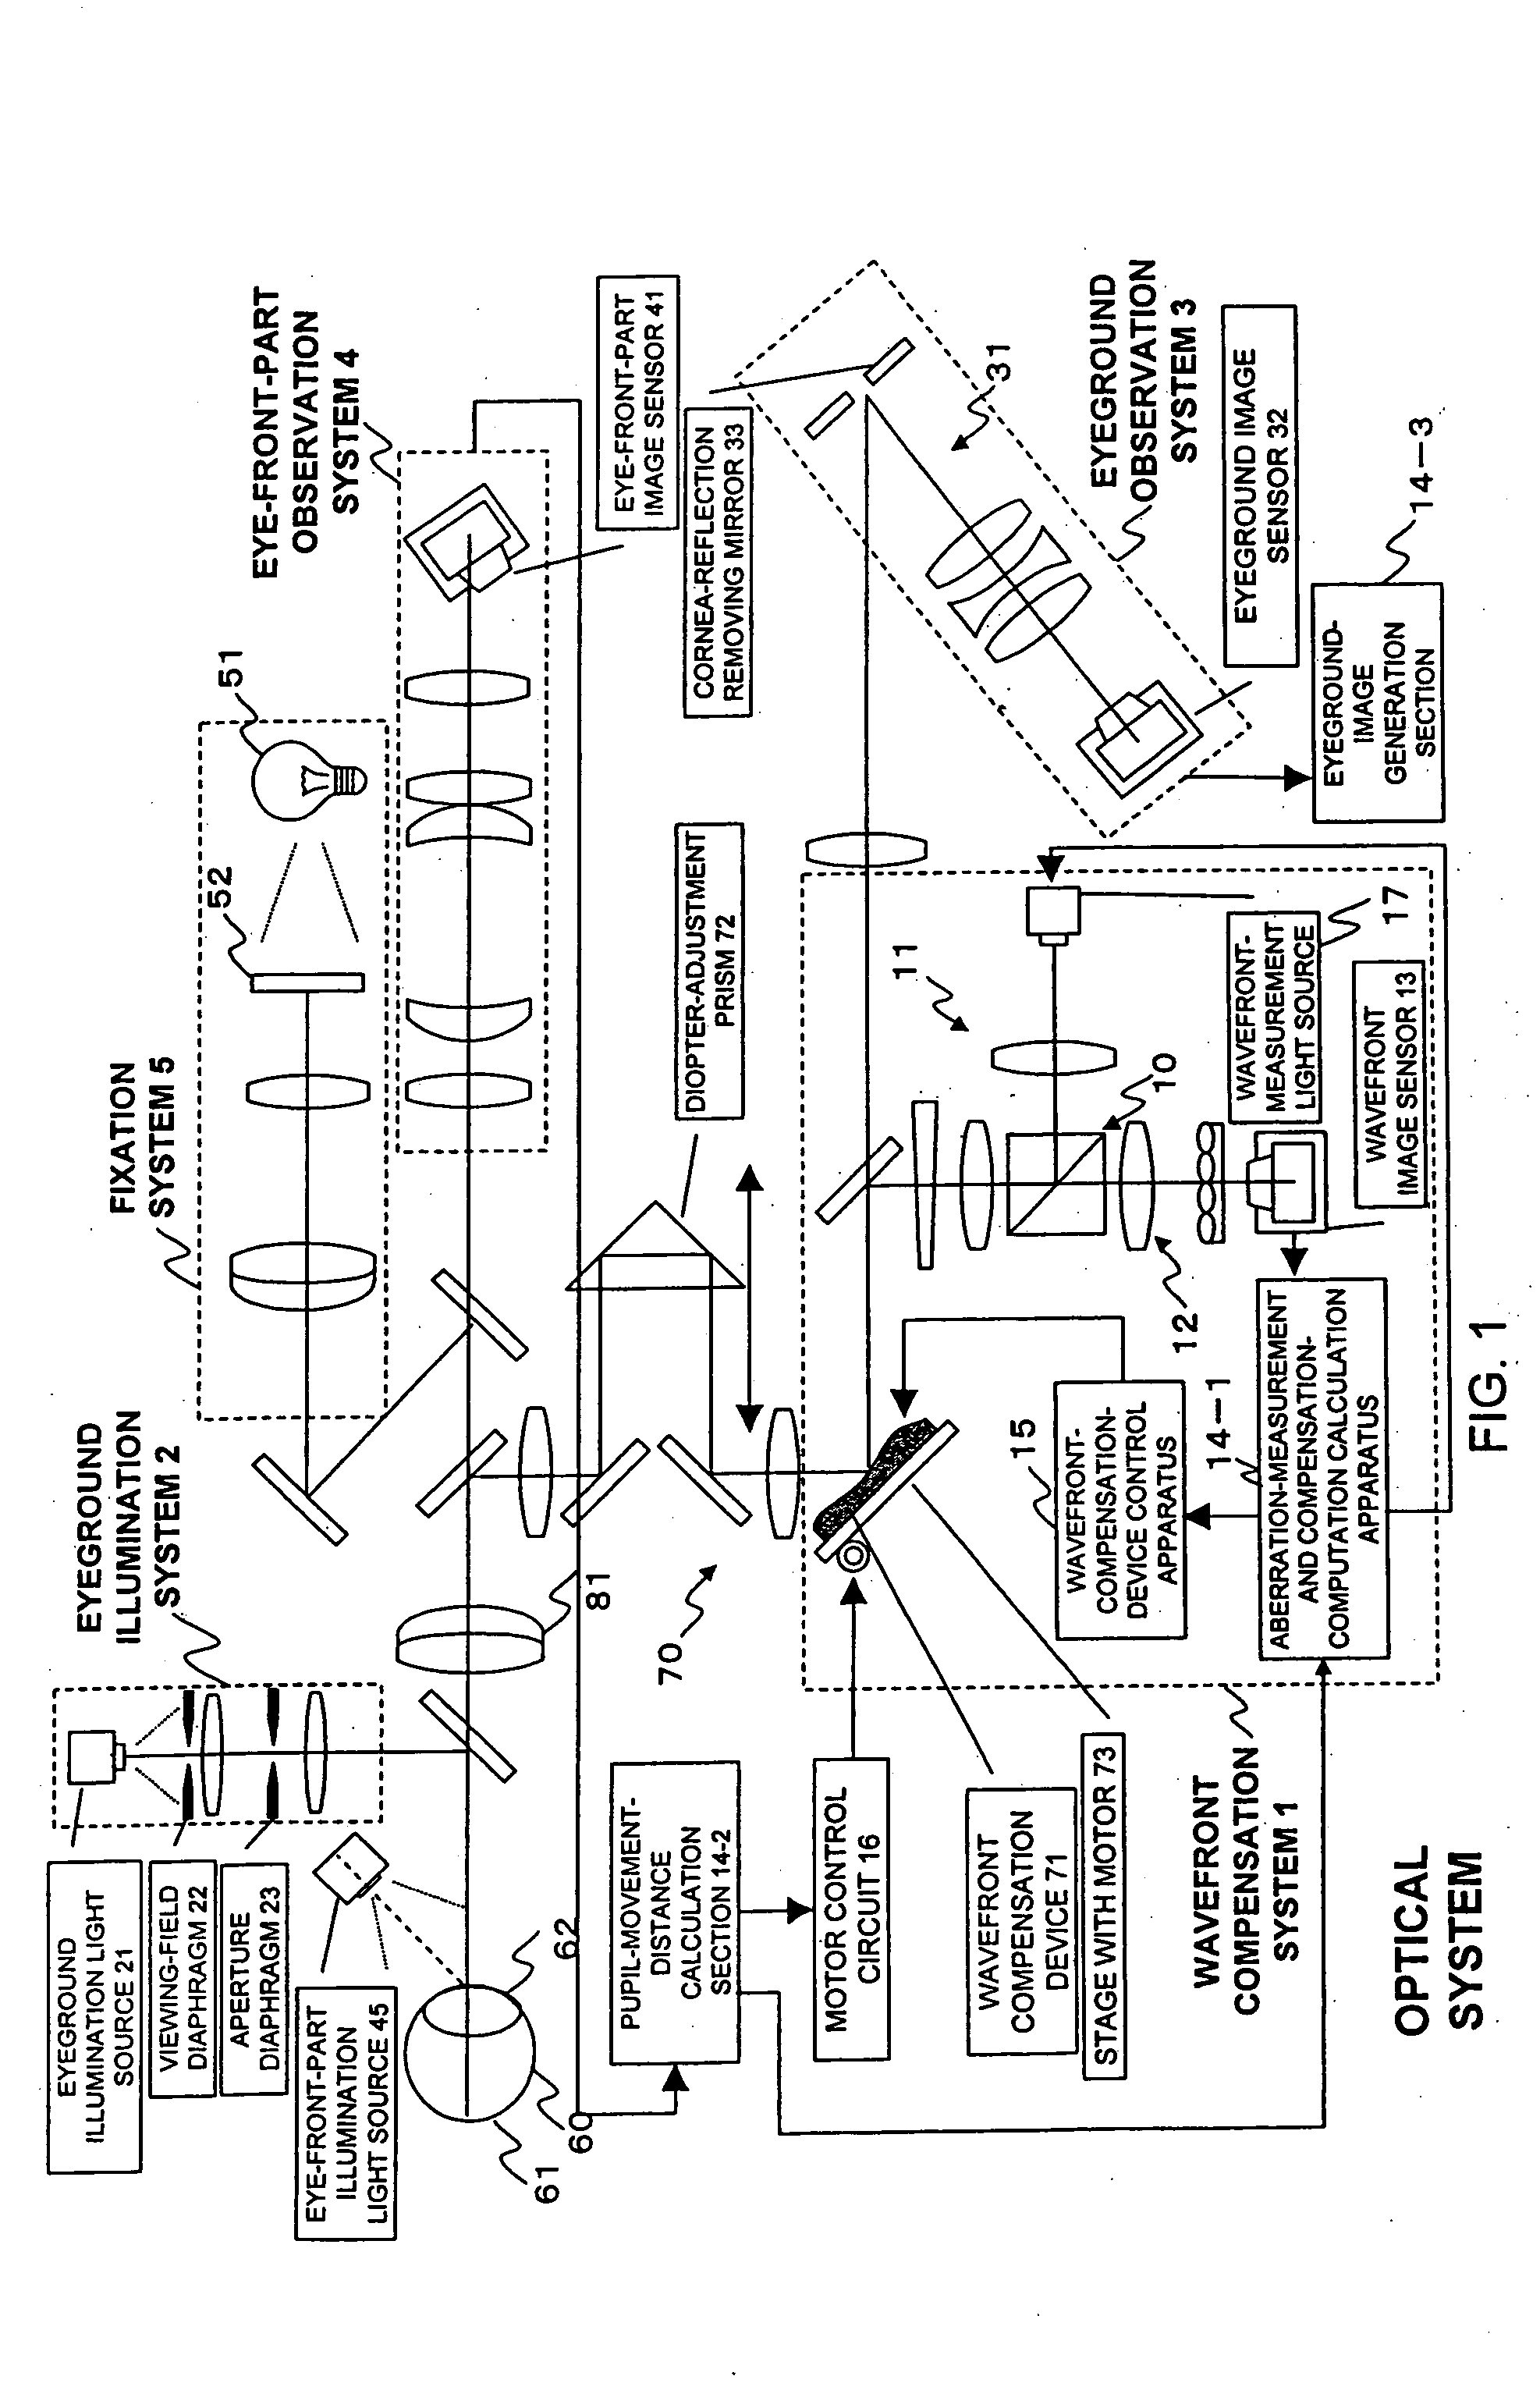 Optical-characteristic measurement apparatus and fundus-image observation apparatus